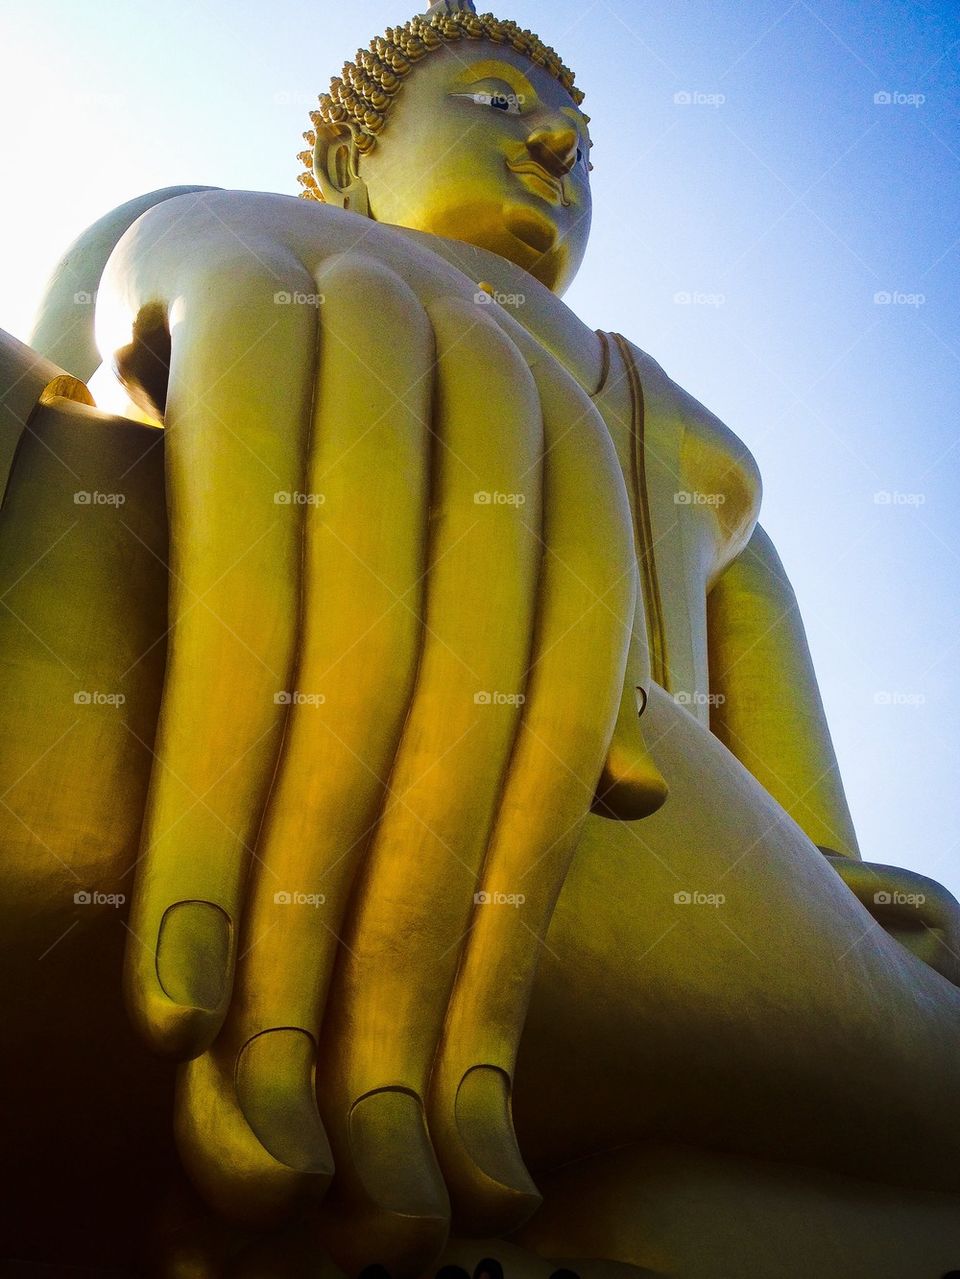 The great image of buddha in Thailand.